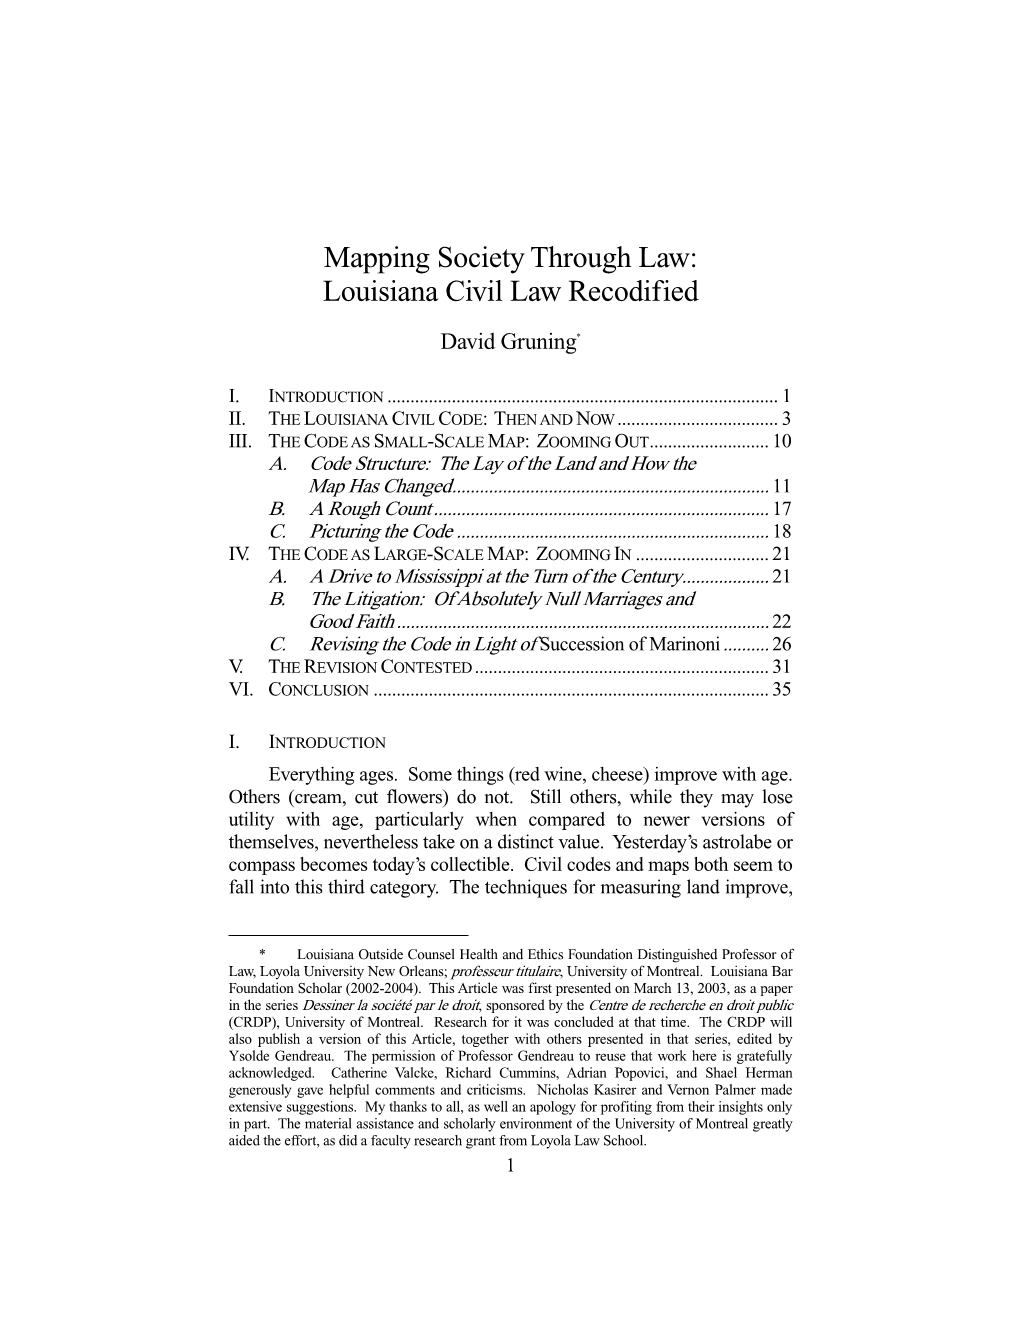 Mapping Society Through Law: Louisiana Civil Law Recodified